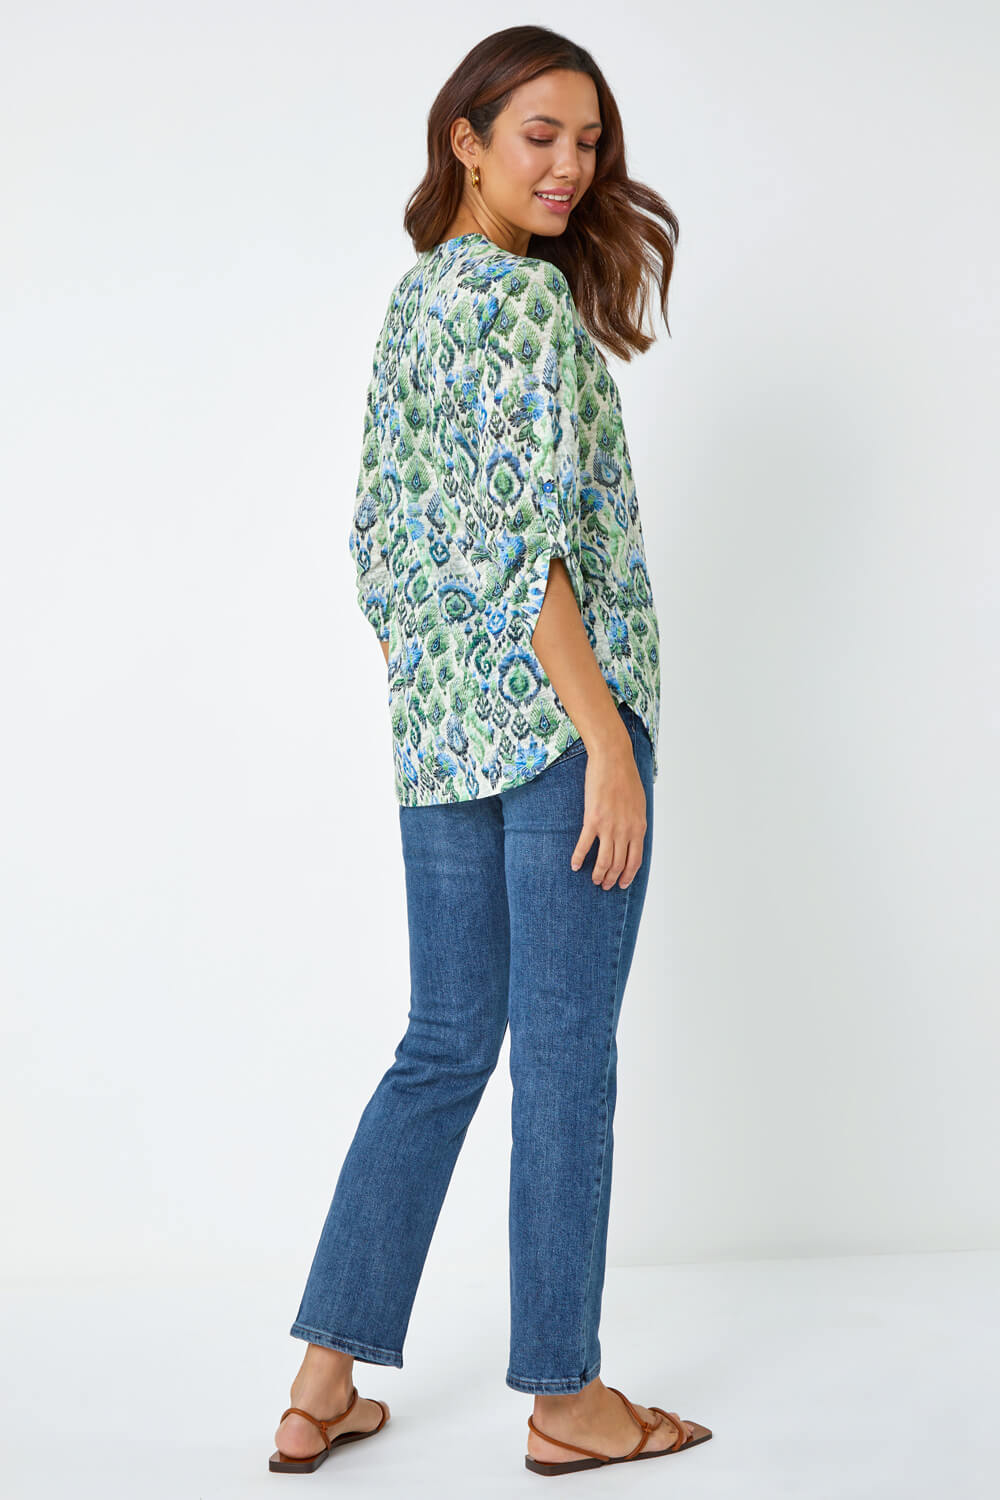 Green Aztec Burnout Print Relaxed Top, Image 3 of 5